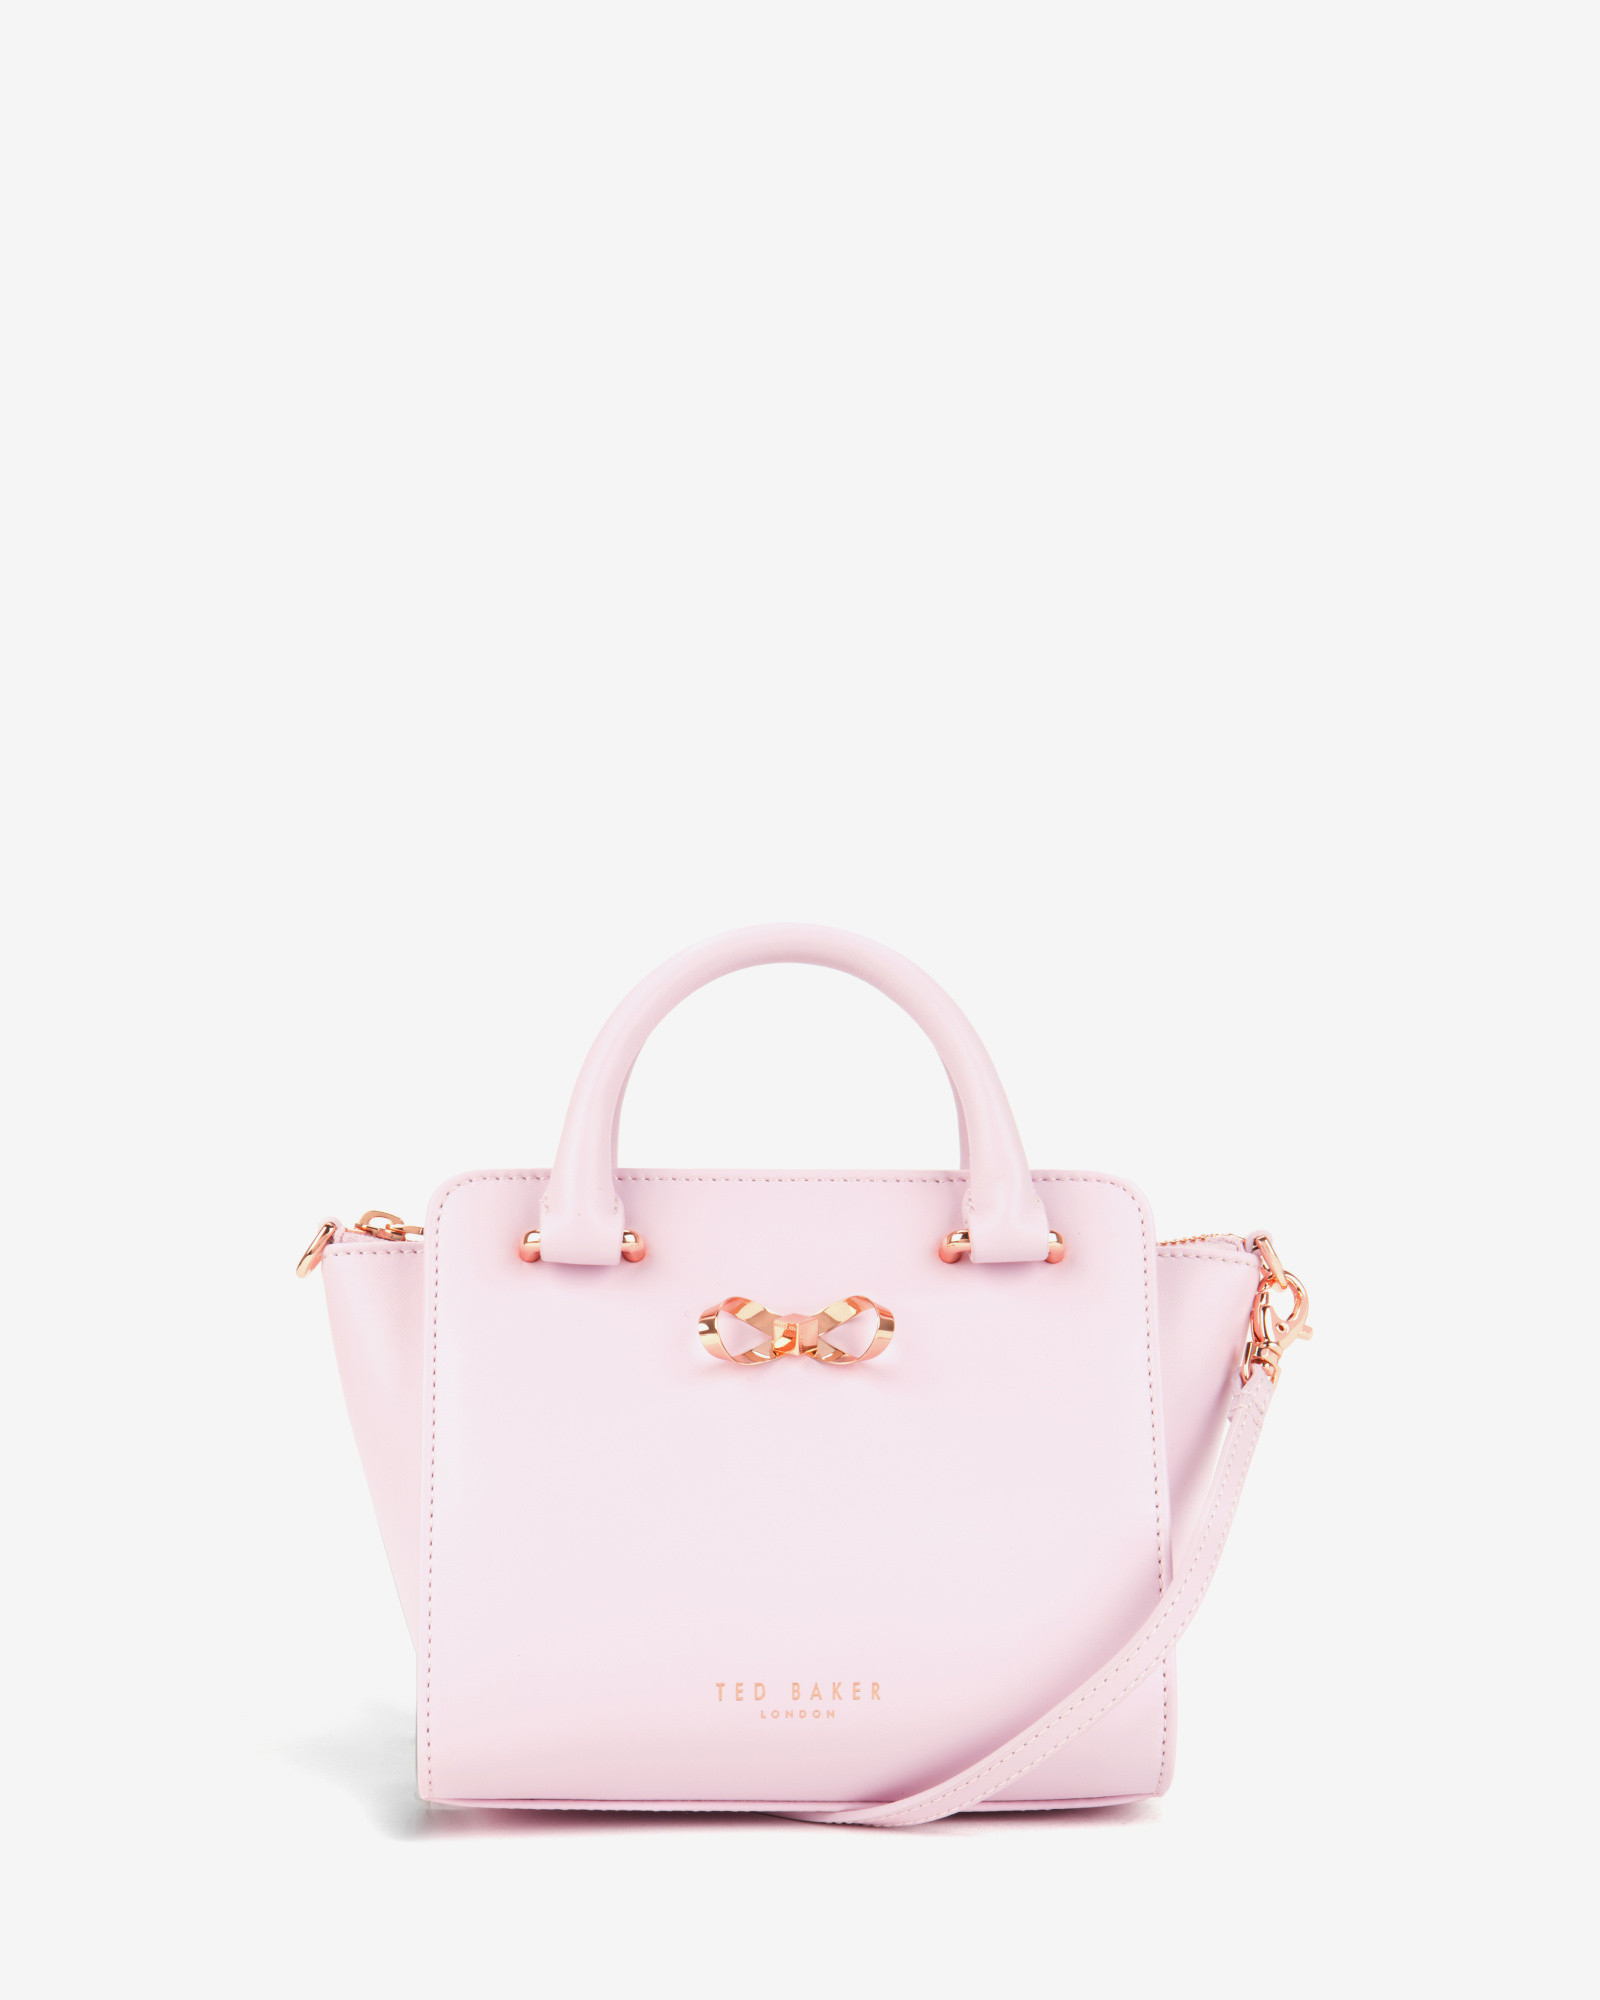 Ted Baker Loop Bow Mini Leather Tote Bag in Pink | Lyst